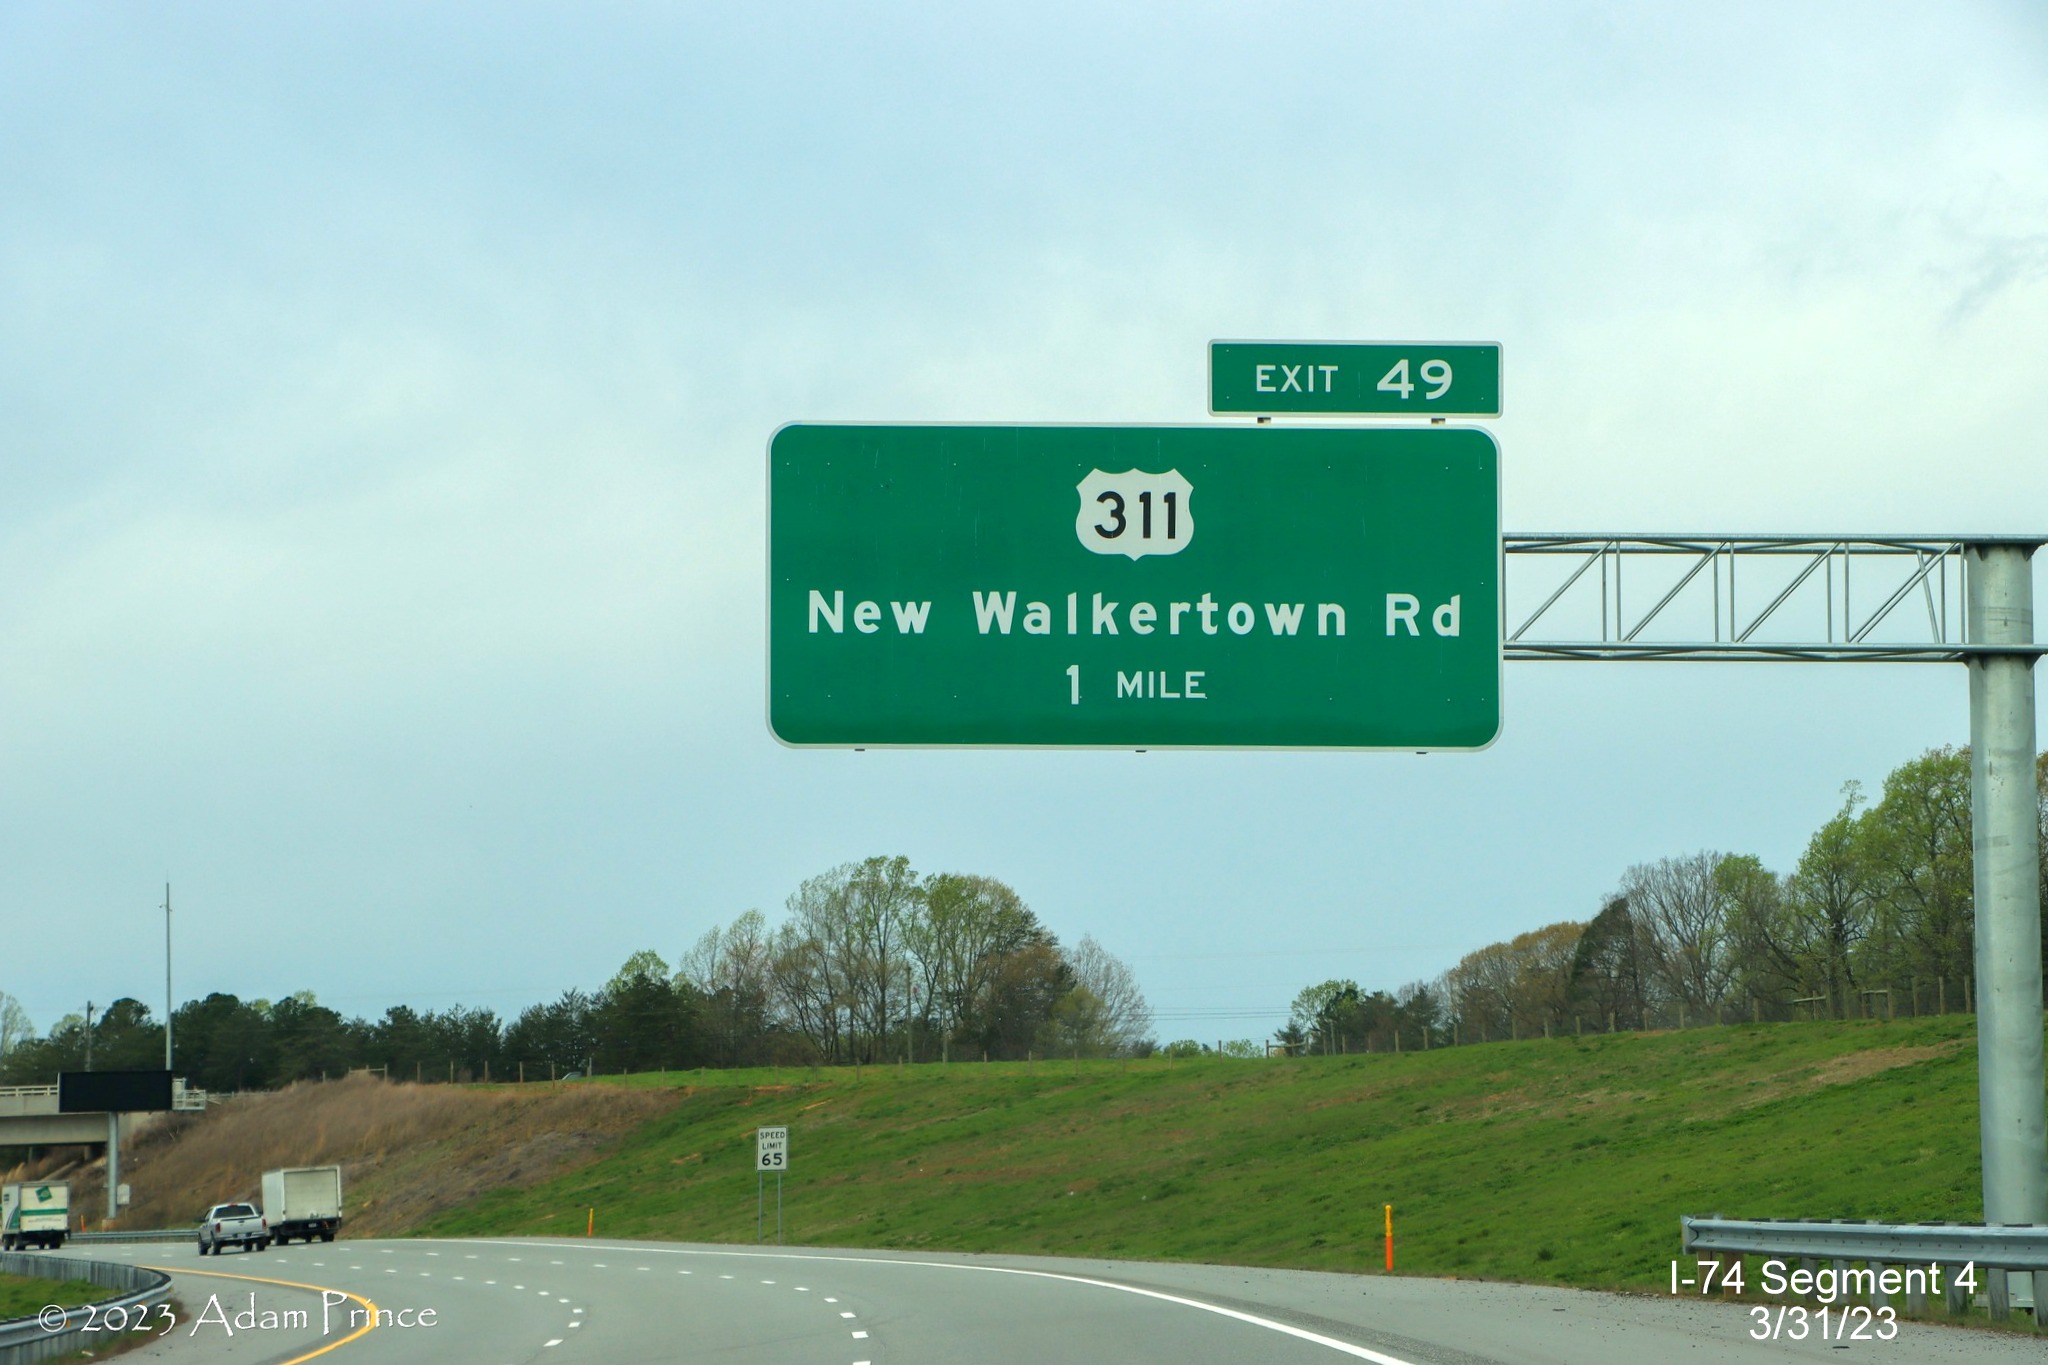 Image of 1 mile advance sign for US 311 exit on NC 74 (Future I-74) West/Winston-Salem 
        Northern Beltway, Adam Prince, March 2023